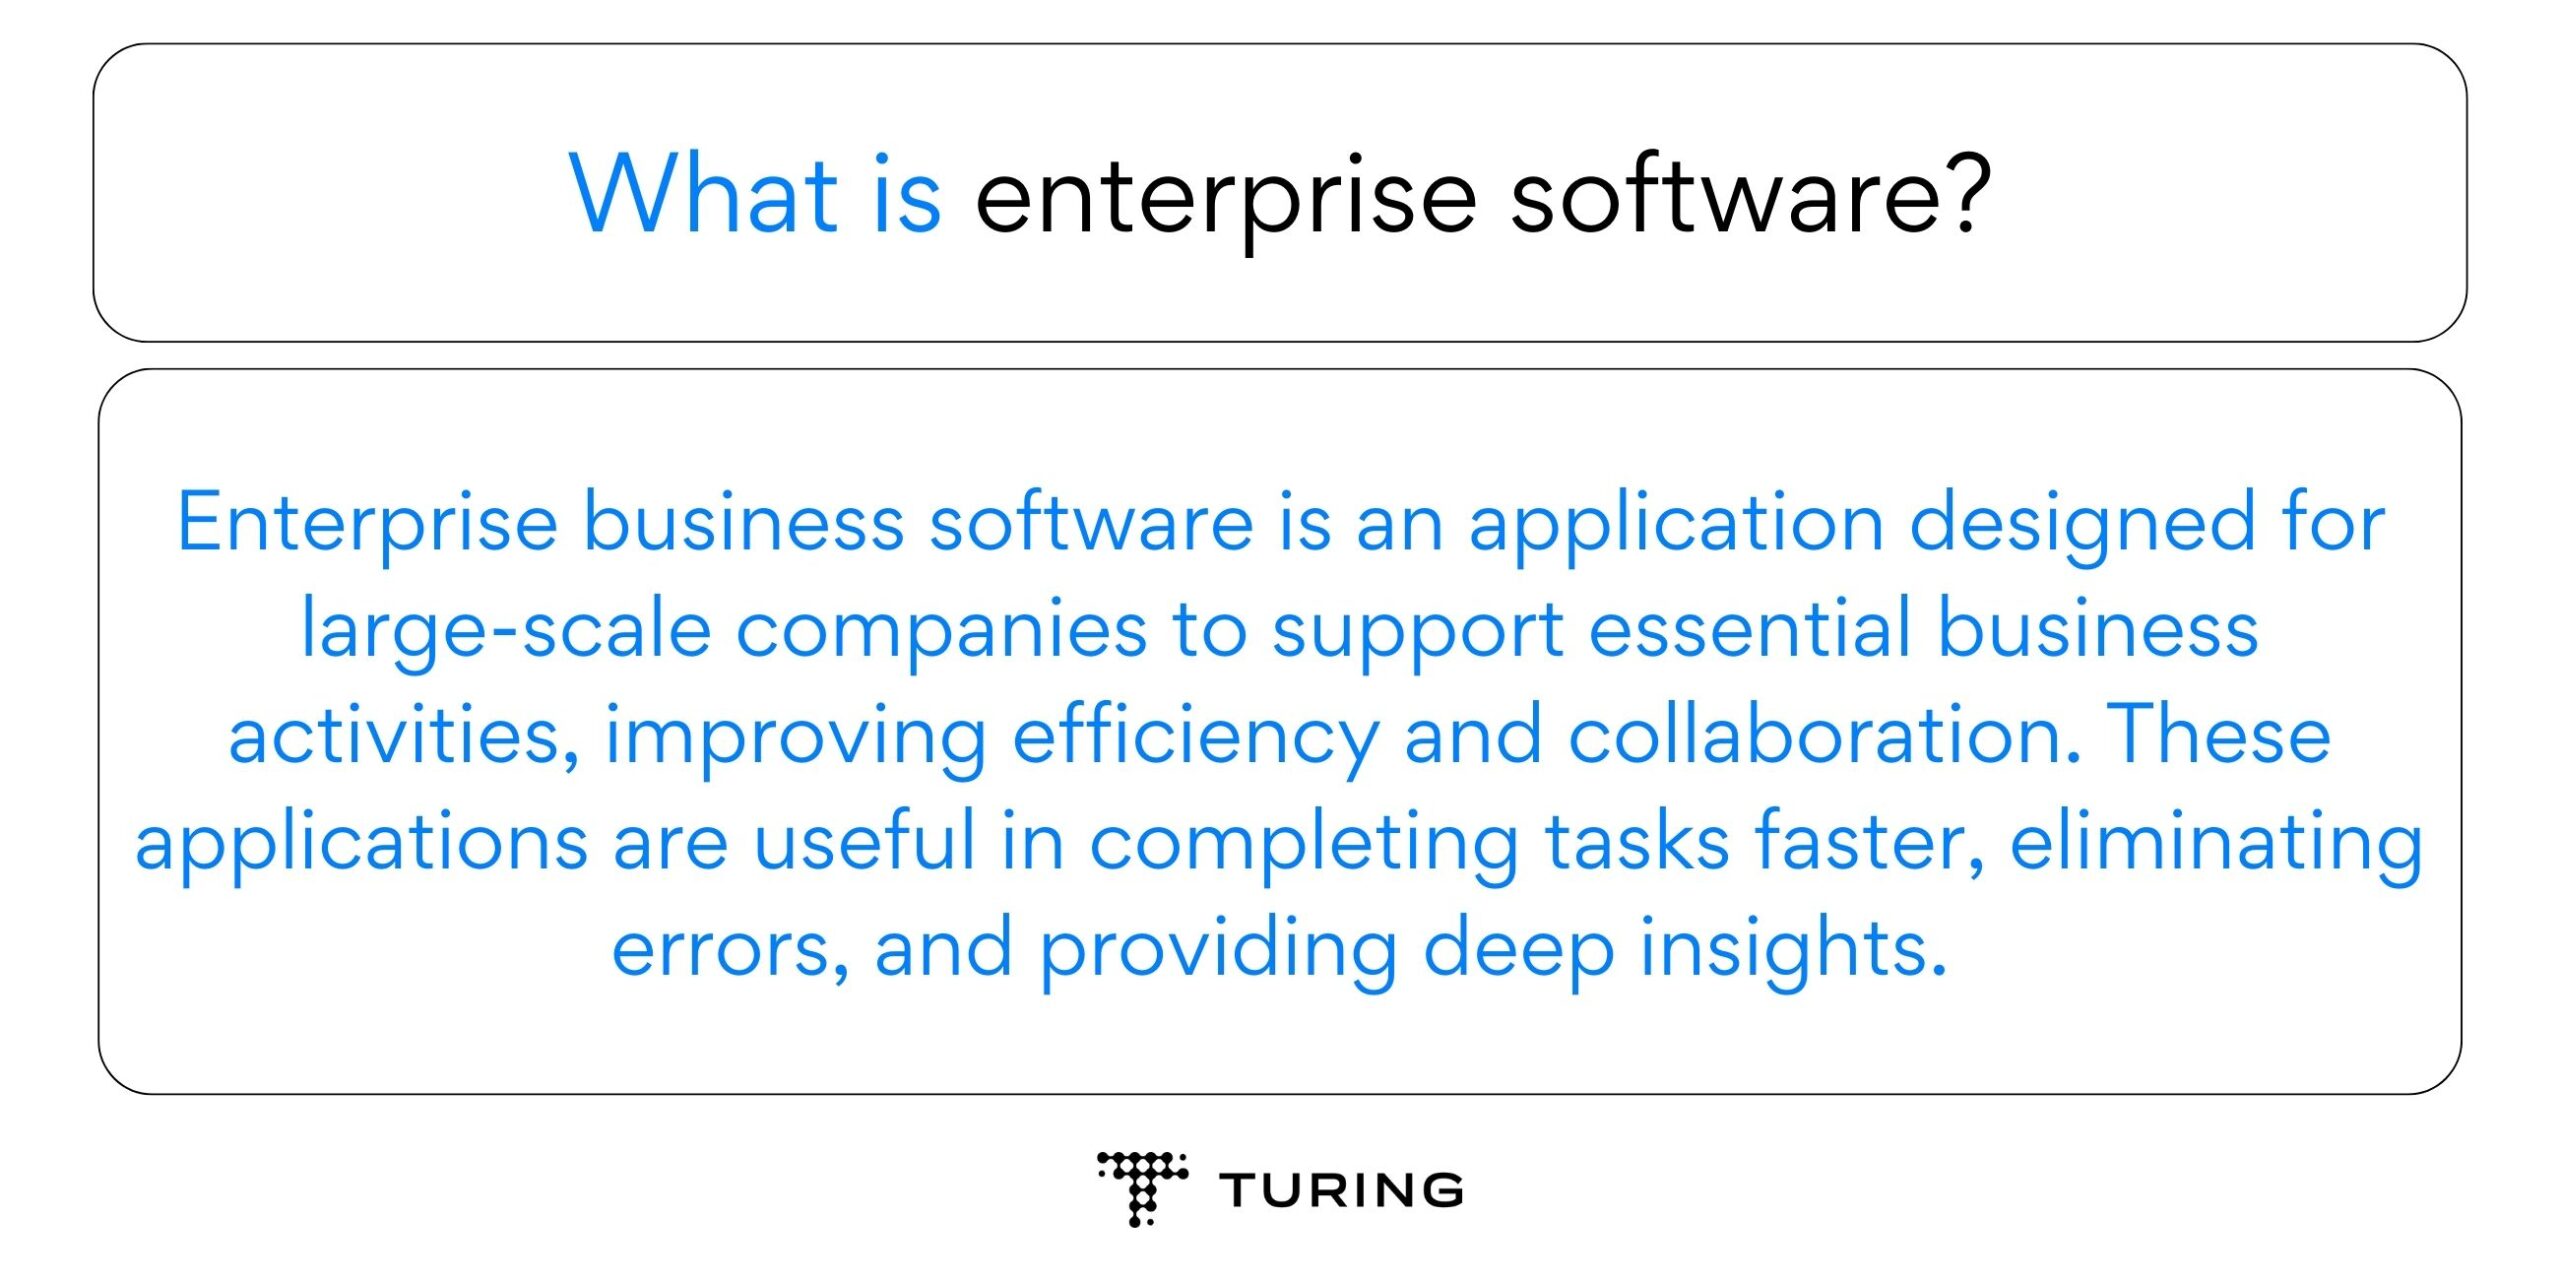 What is enterprise software?